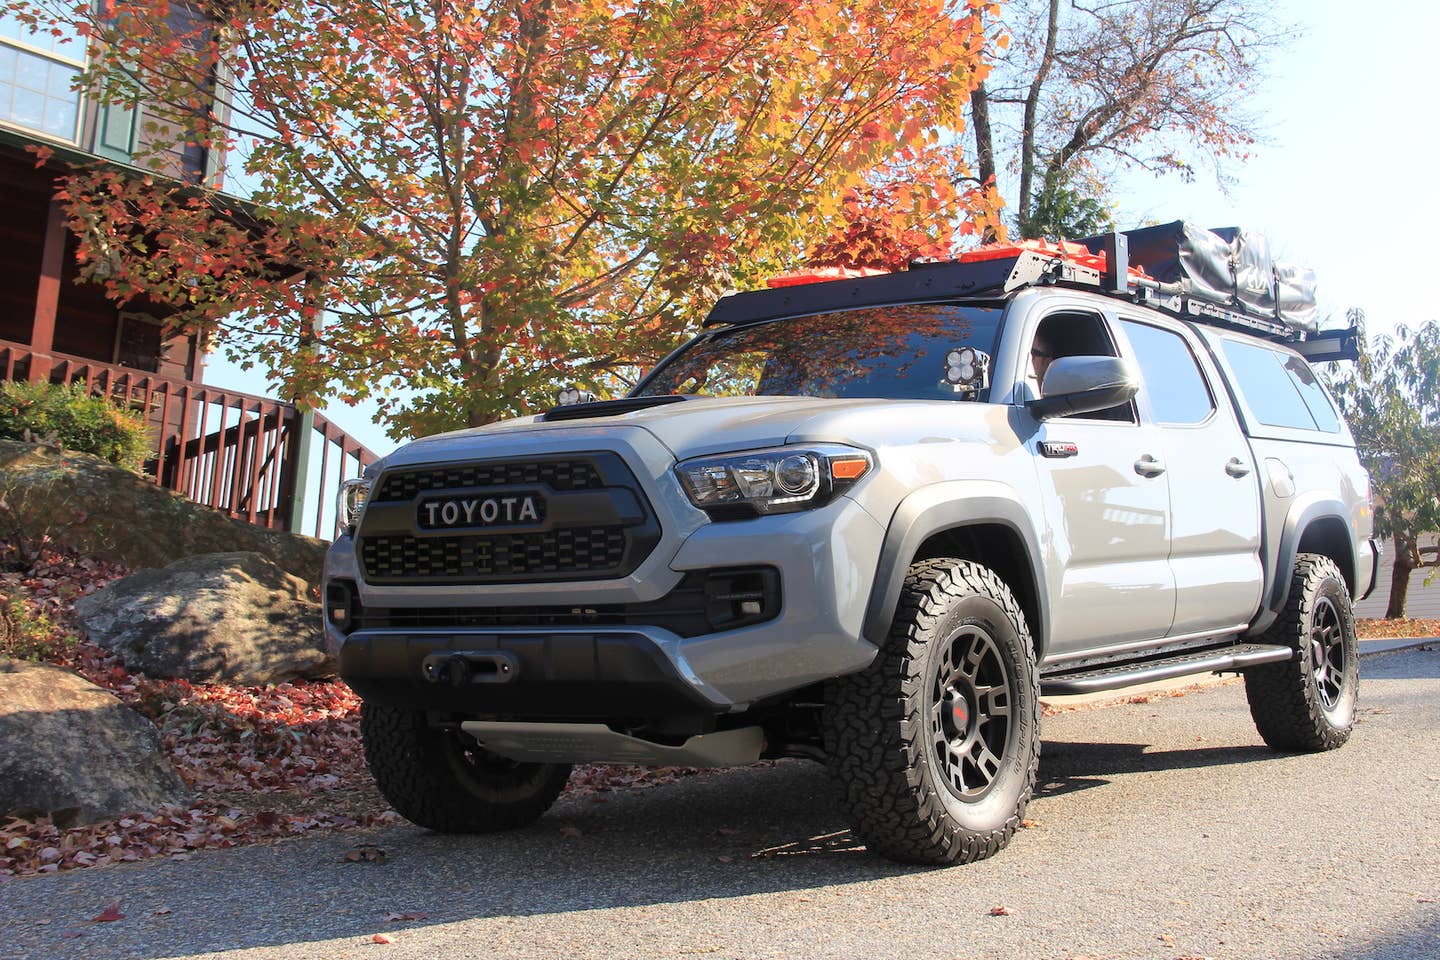 2017-toyota-tacoma-trd-pro-cement-feature-7.jpg